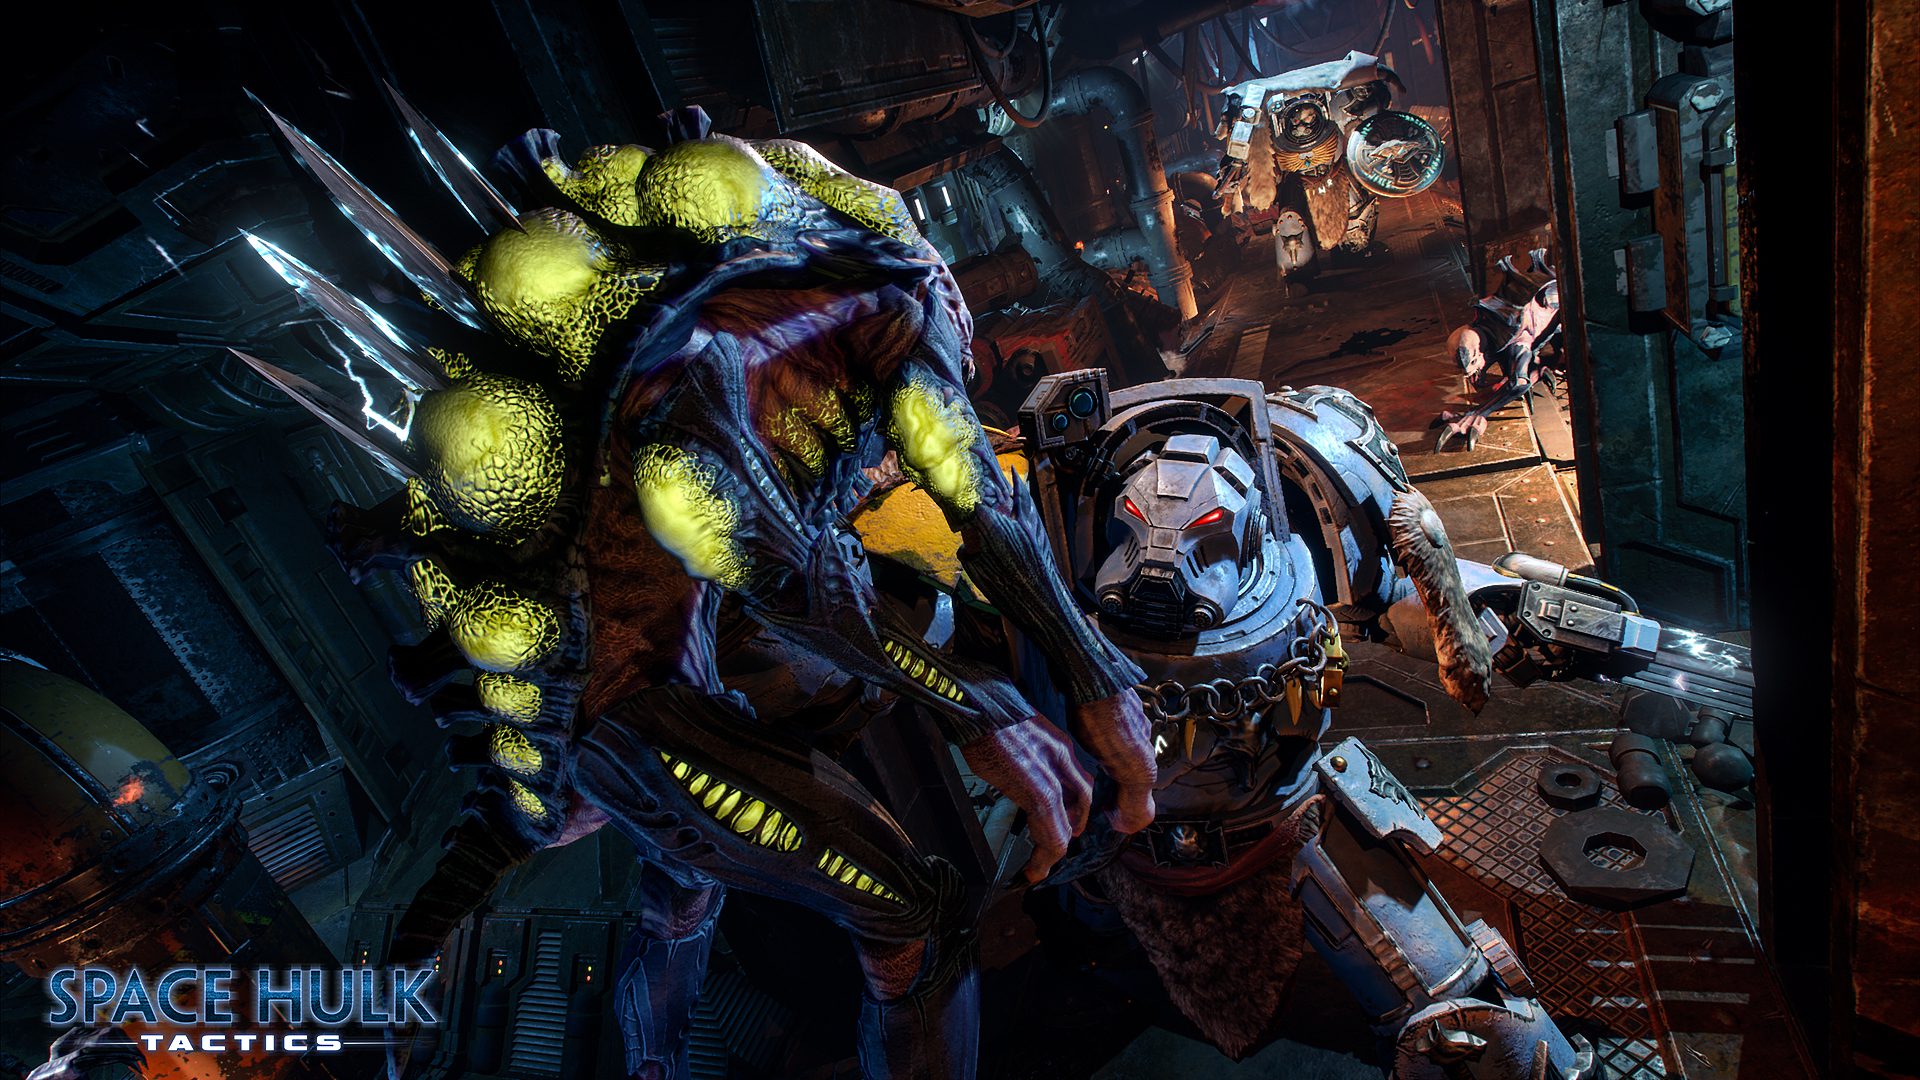 Witness endless battle and the doom of a world in the Space Hulk: Tactics launch trailer